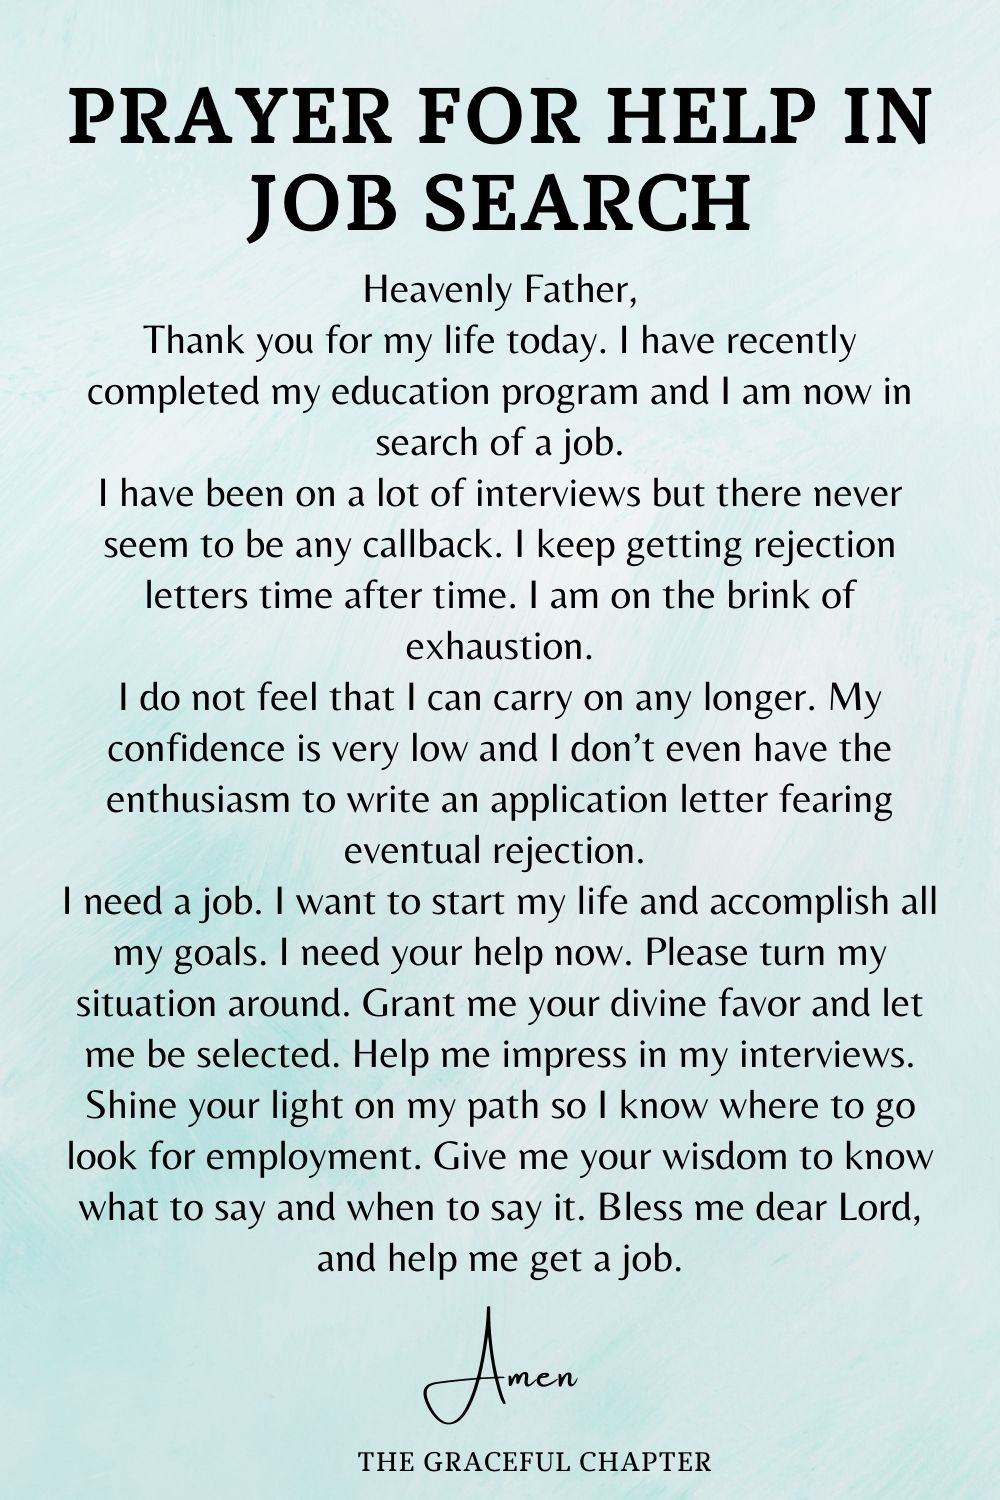 Prayer for help in job search